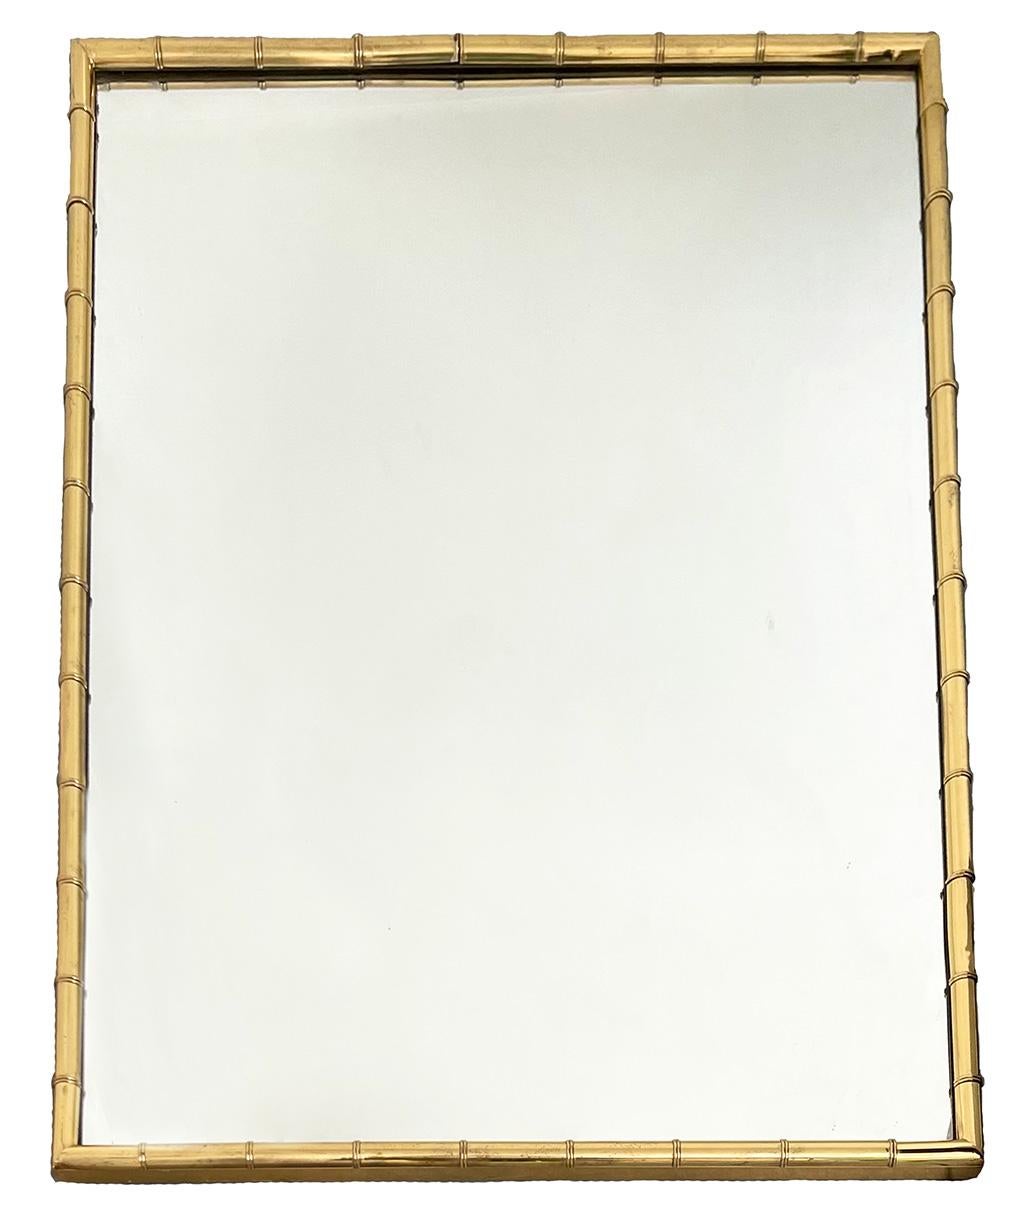 When I found these I could not believe my luck! A pair of brass Mastercraft faux Bamboo mirrors in great shape! These mid-century Hollywood Regency mirrors are iconic, hard to find and very hard to find in a set. They were designed by William